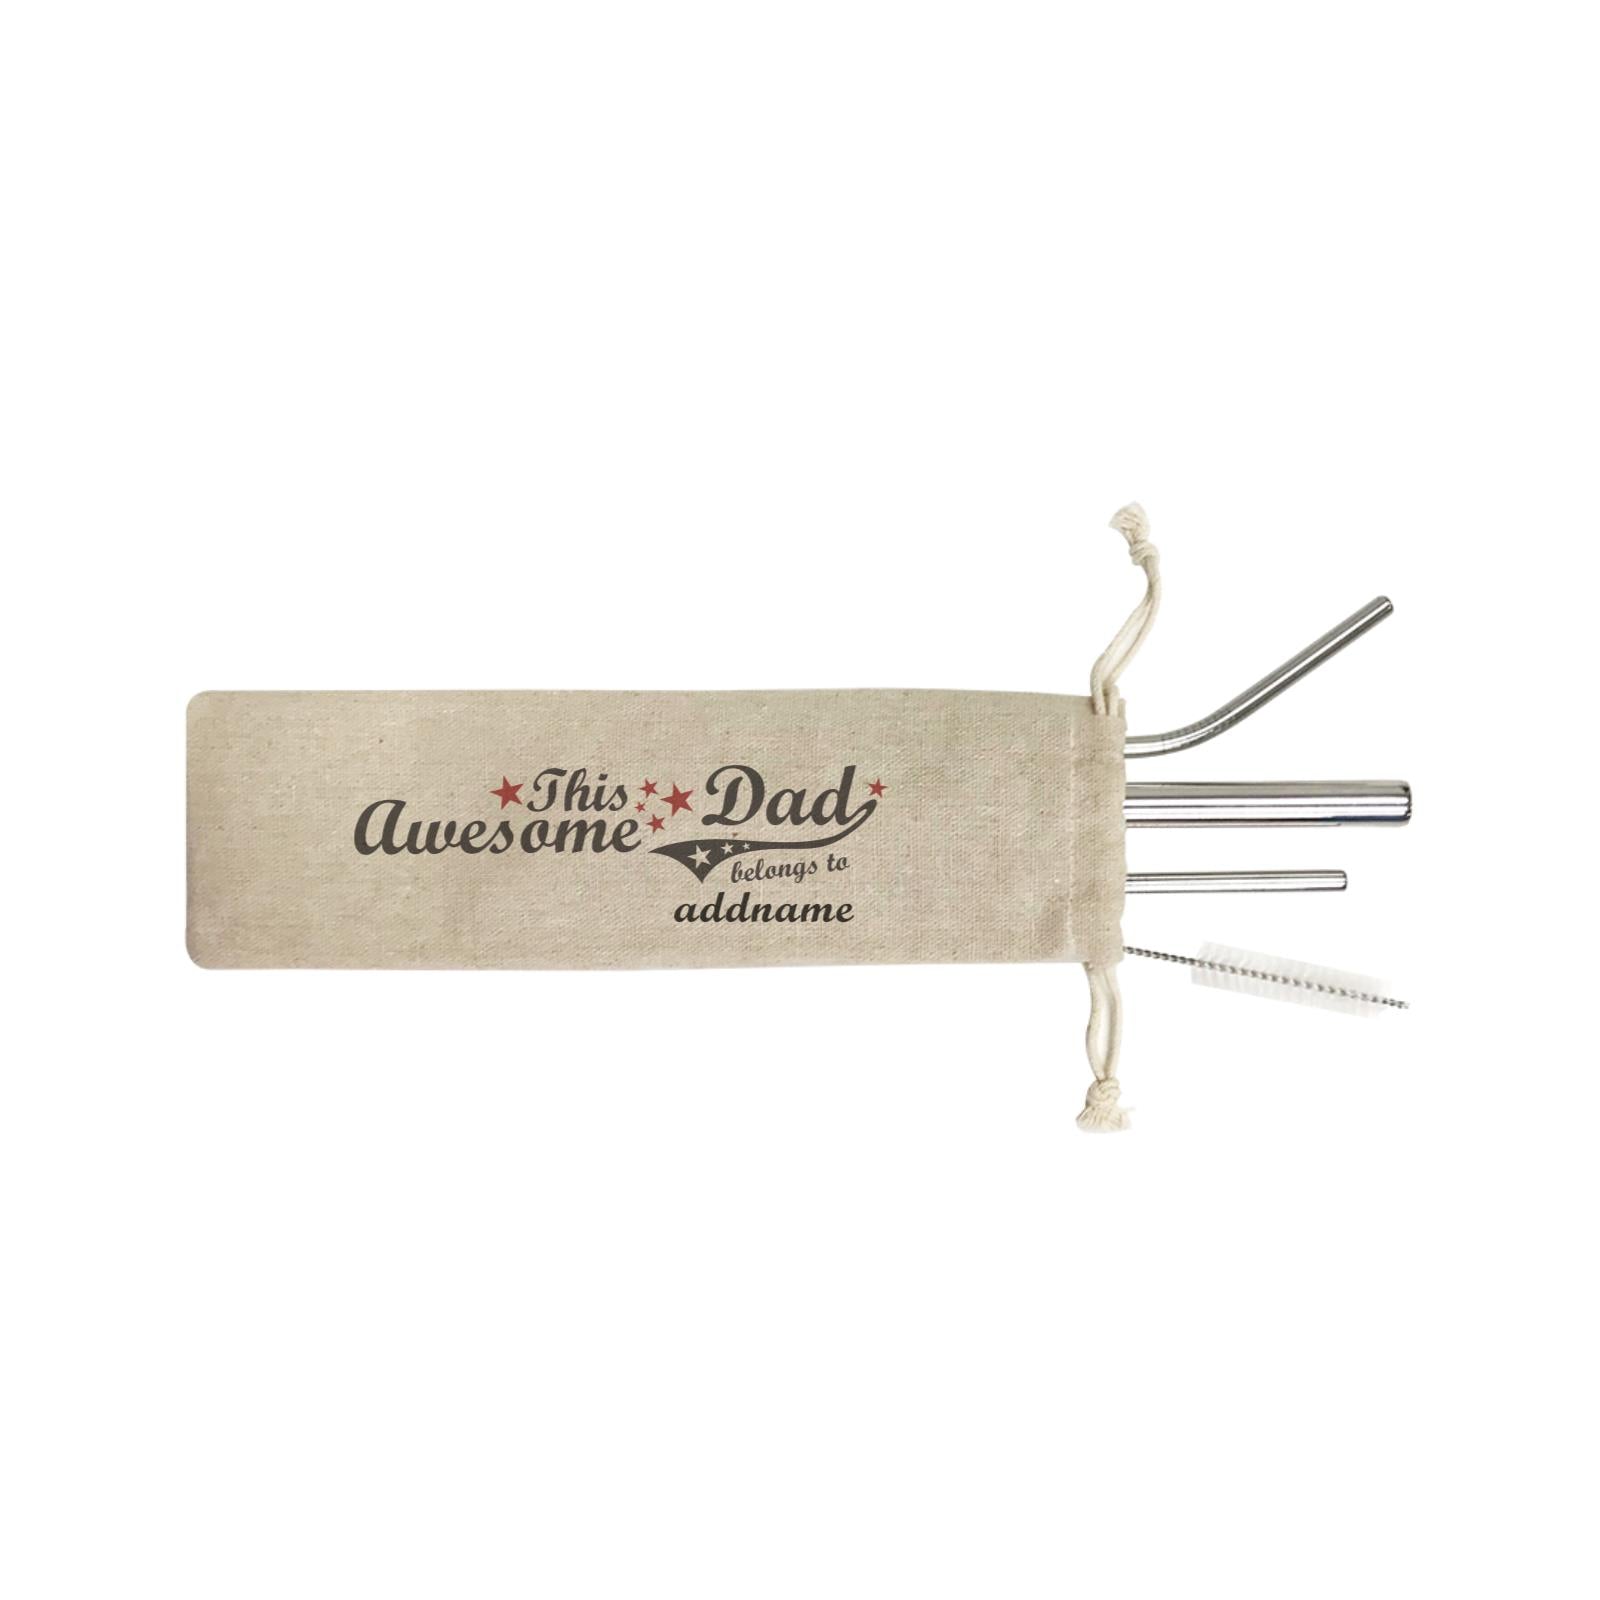 This Awesome Dad Belongs to Addname SB 4-In-1 Stainless Steel Straw Set in Satchel